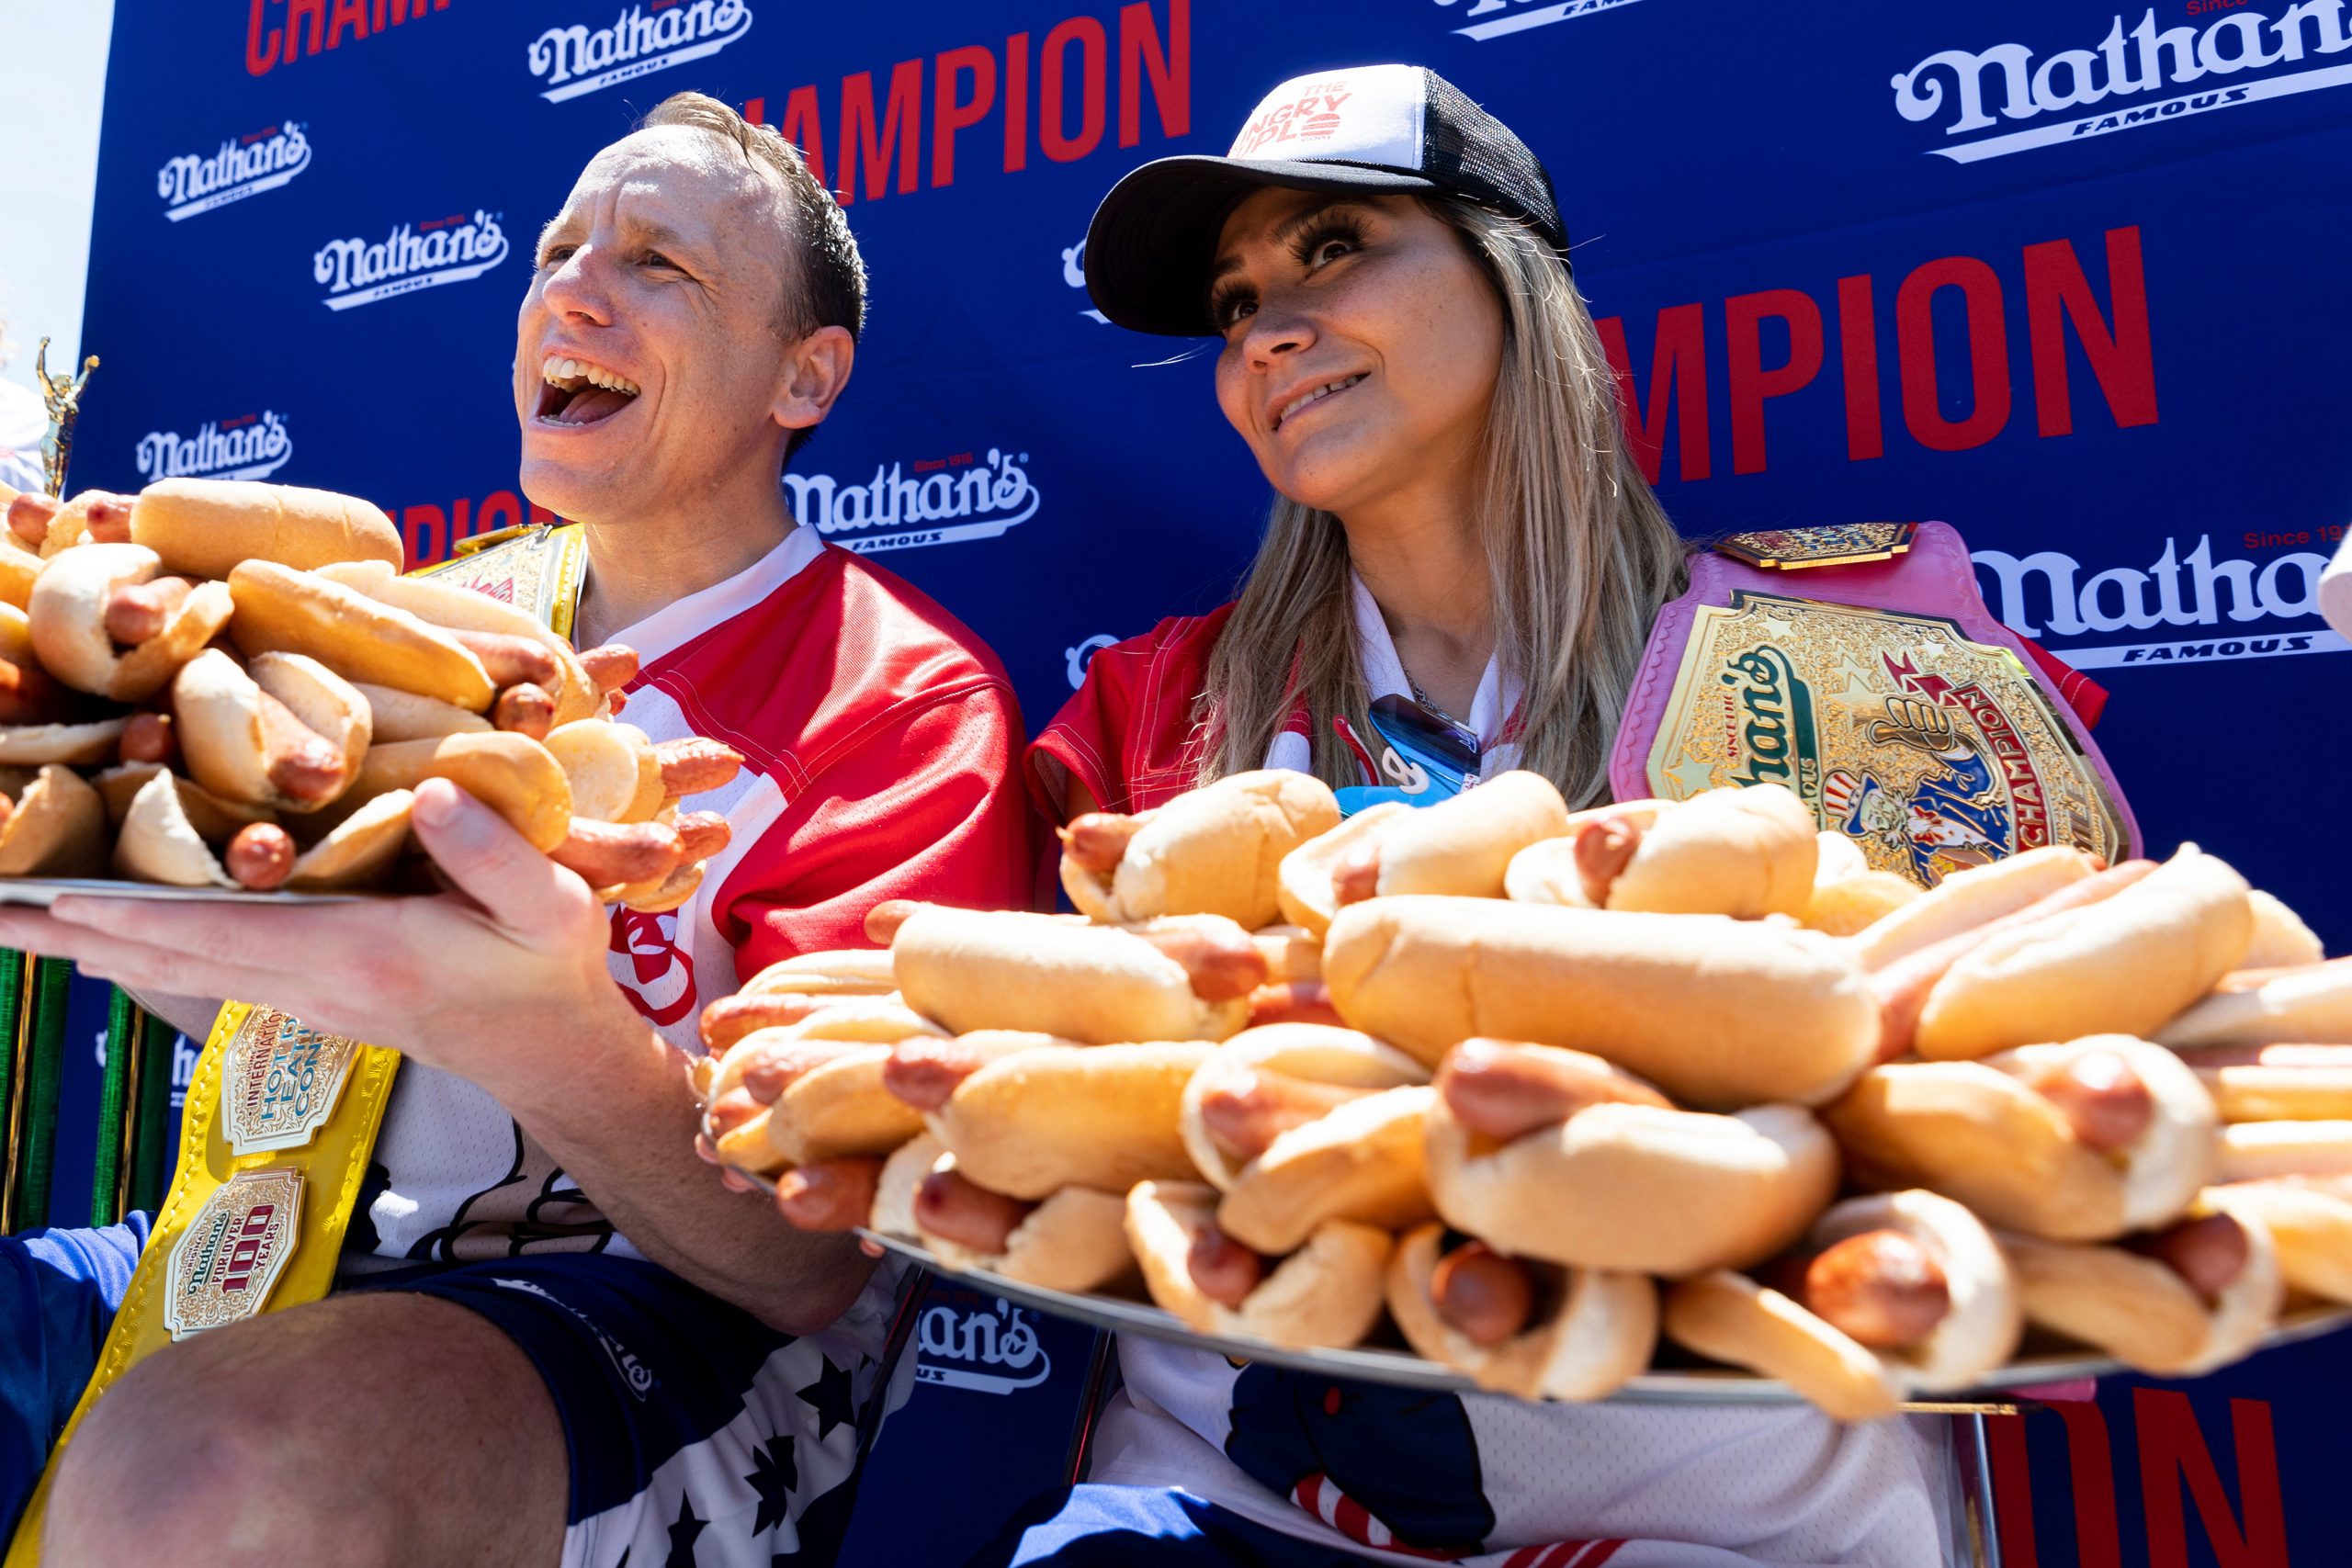 July 4: Joey Chestnut marks 15th win at Nathan’s hot dog eating competition